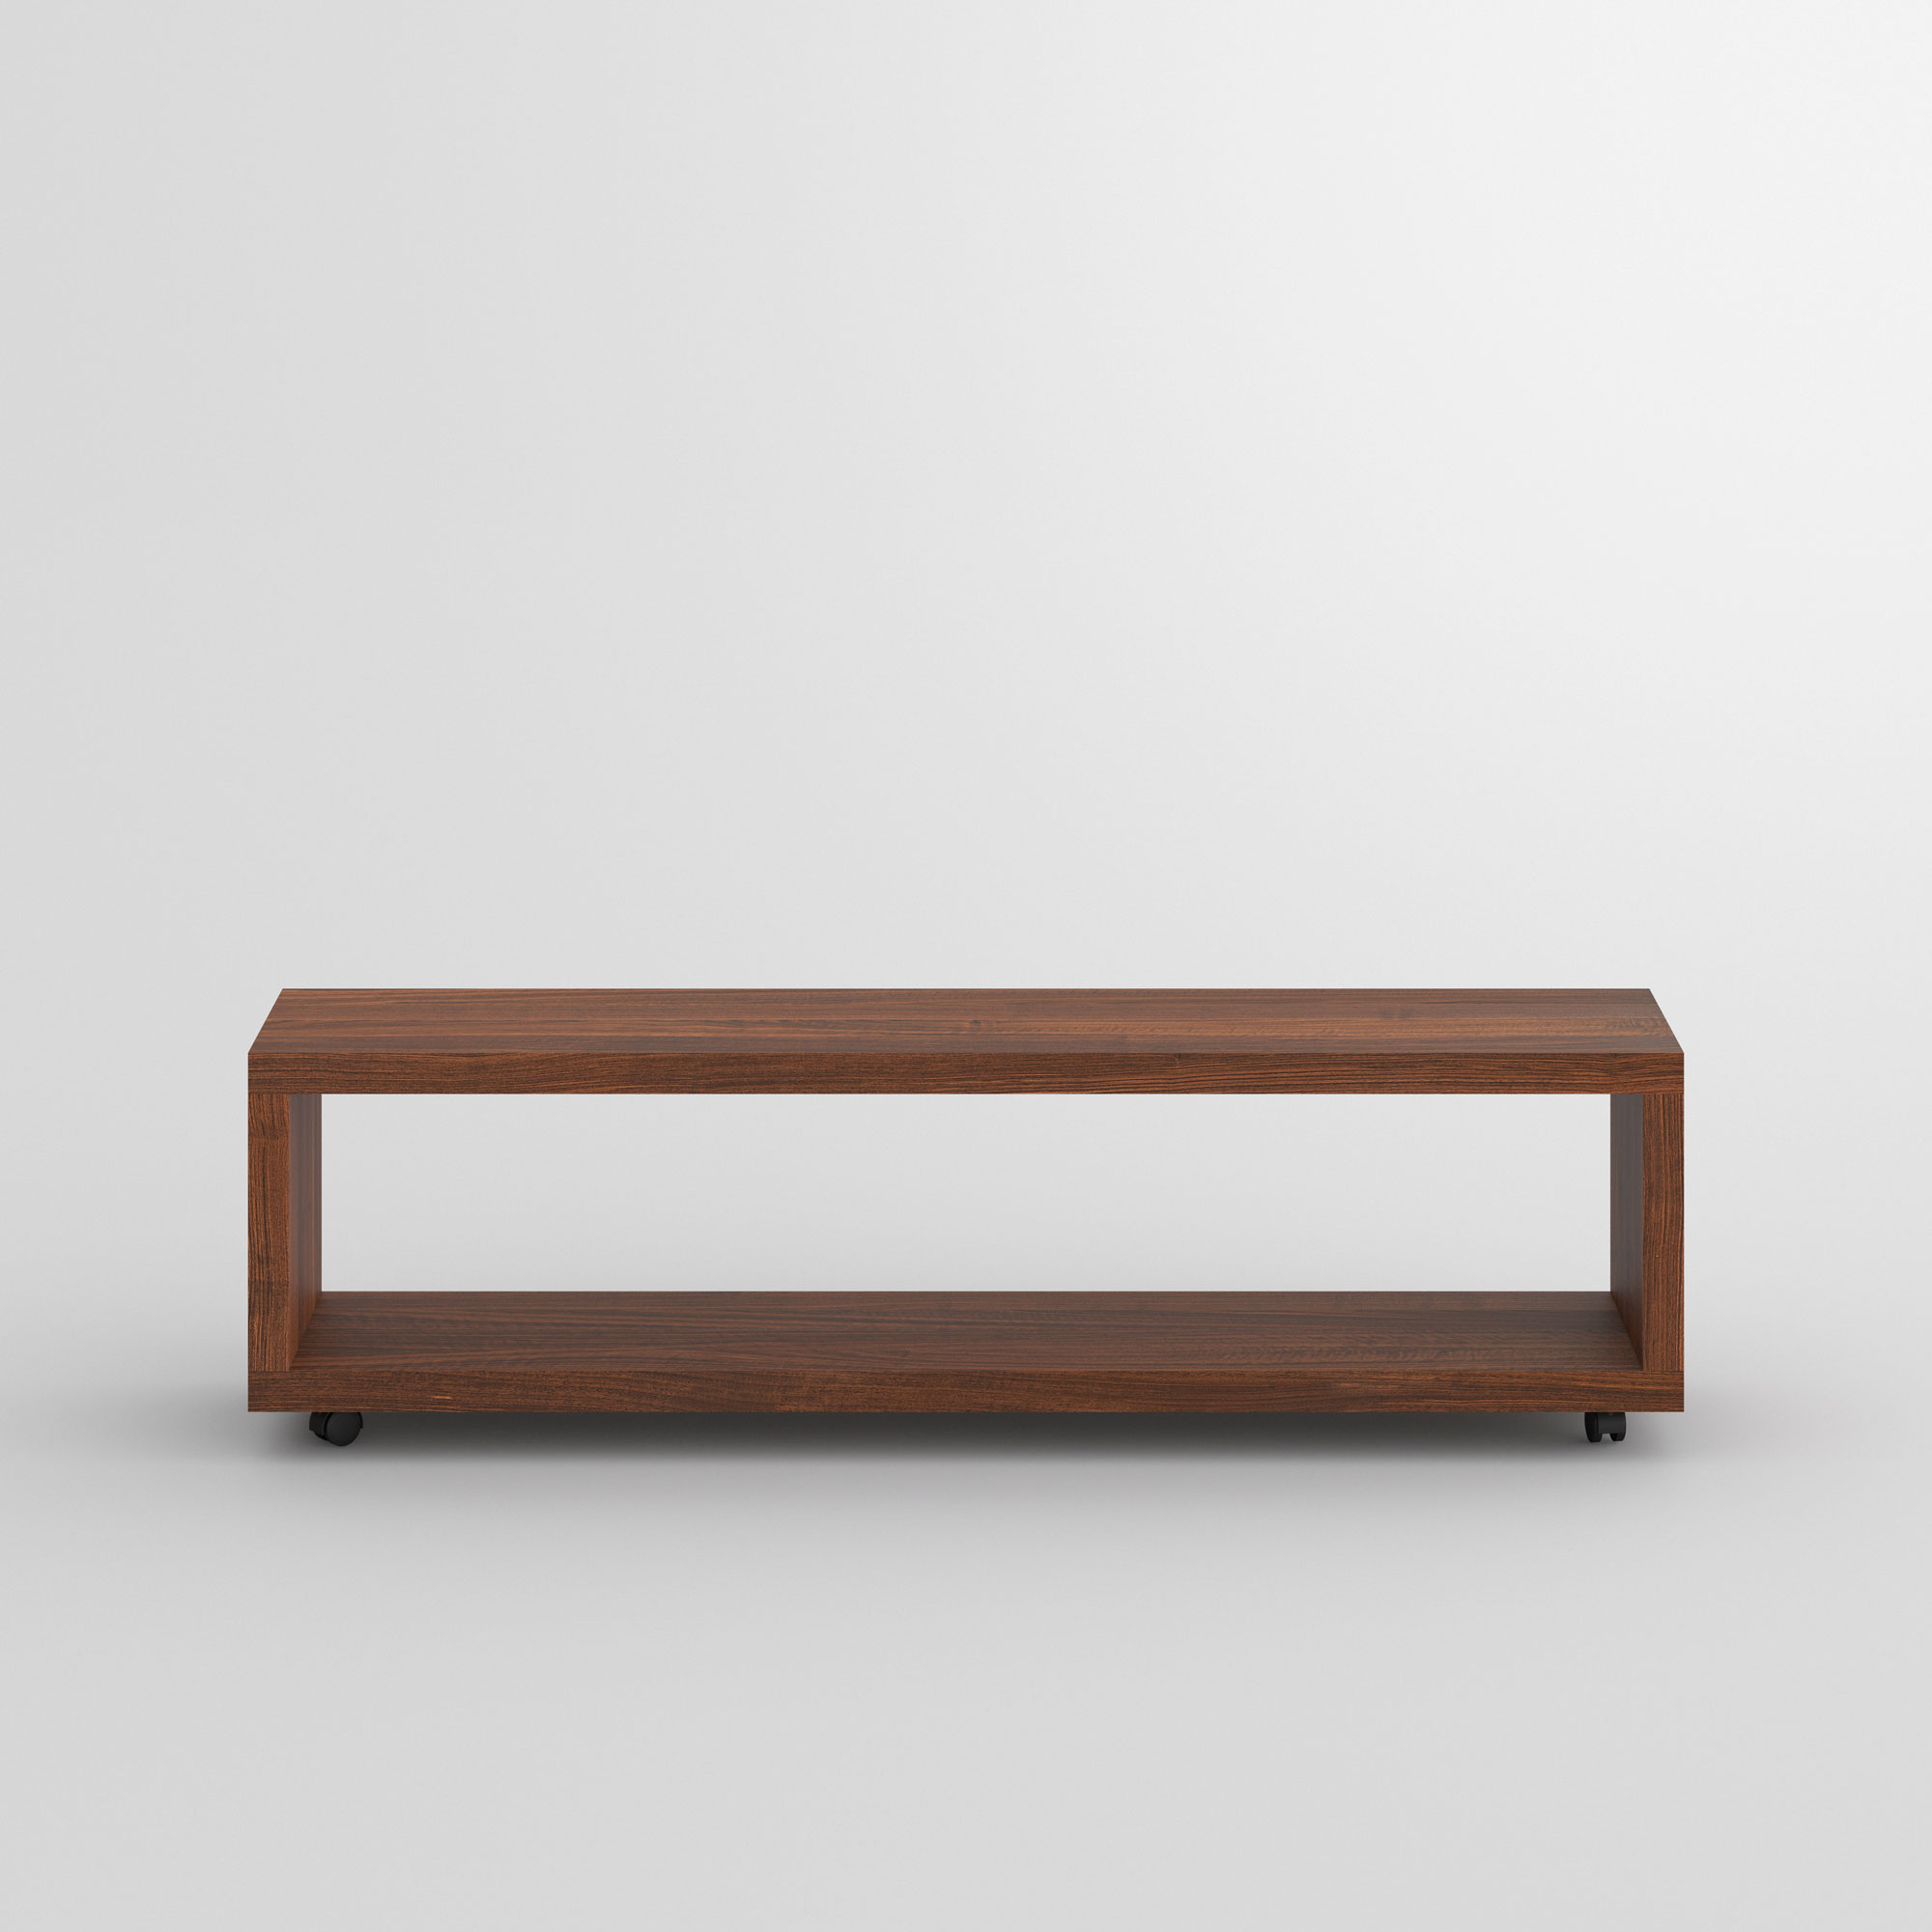 Rolling Night Table MENA-B-ROL cam2 custom made in solid wood by vitamin design